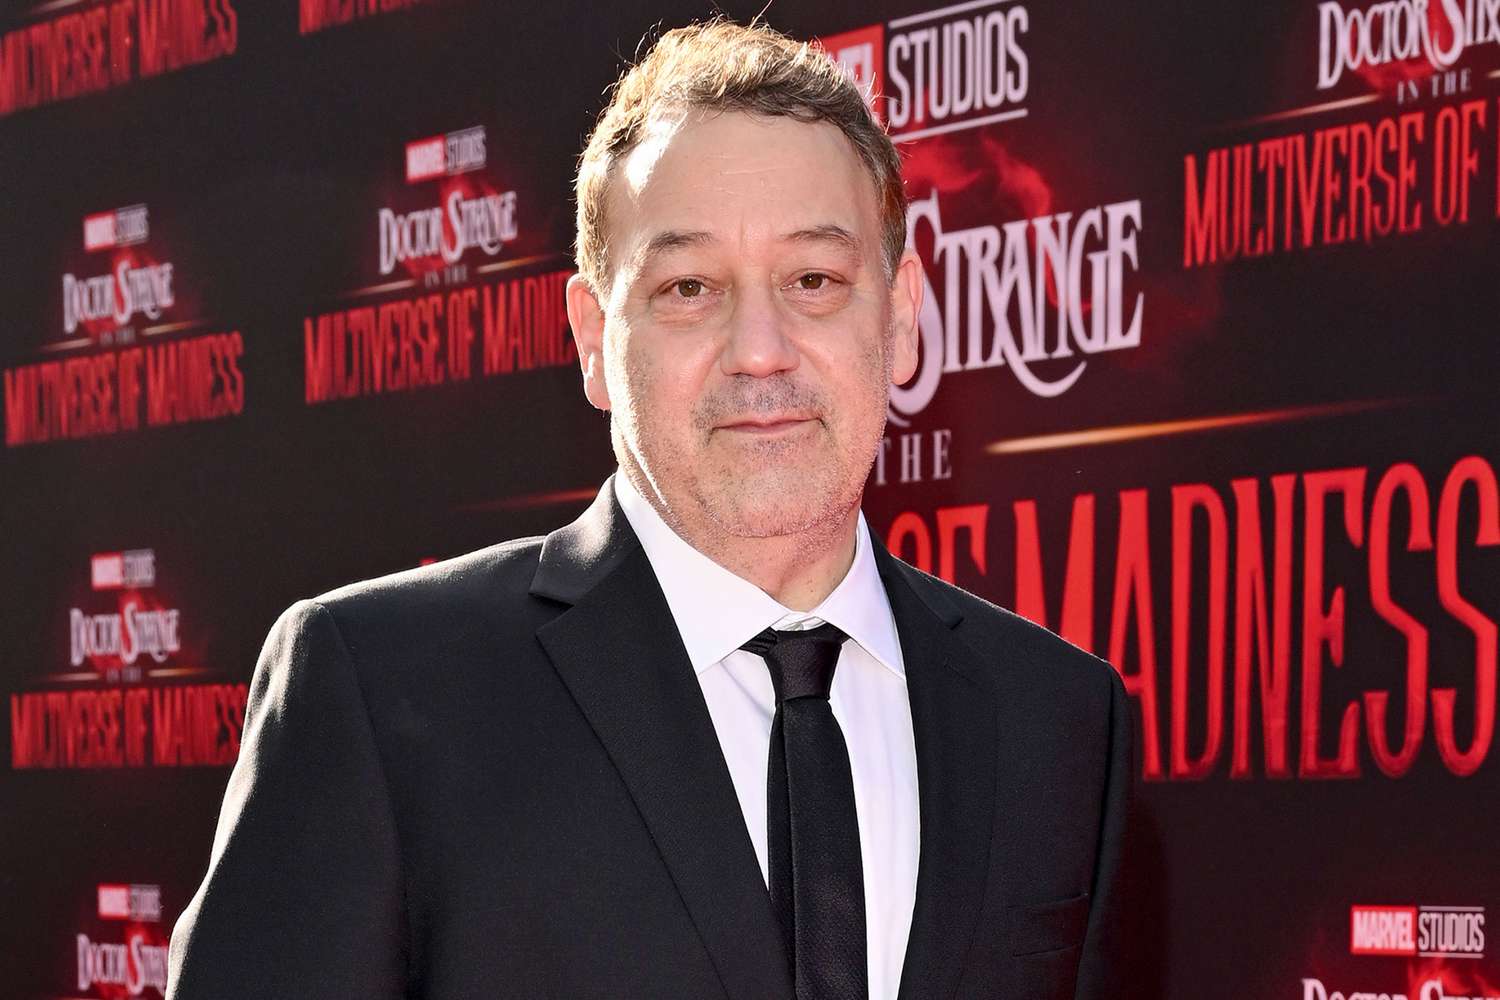 Sam Raimi attends Marvel Studios "Doctor Strange in the Multiverse of Madness" Premiere at El Capitan Theatre on May 02, 2022 in Los Angeles, California.